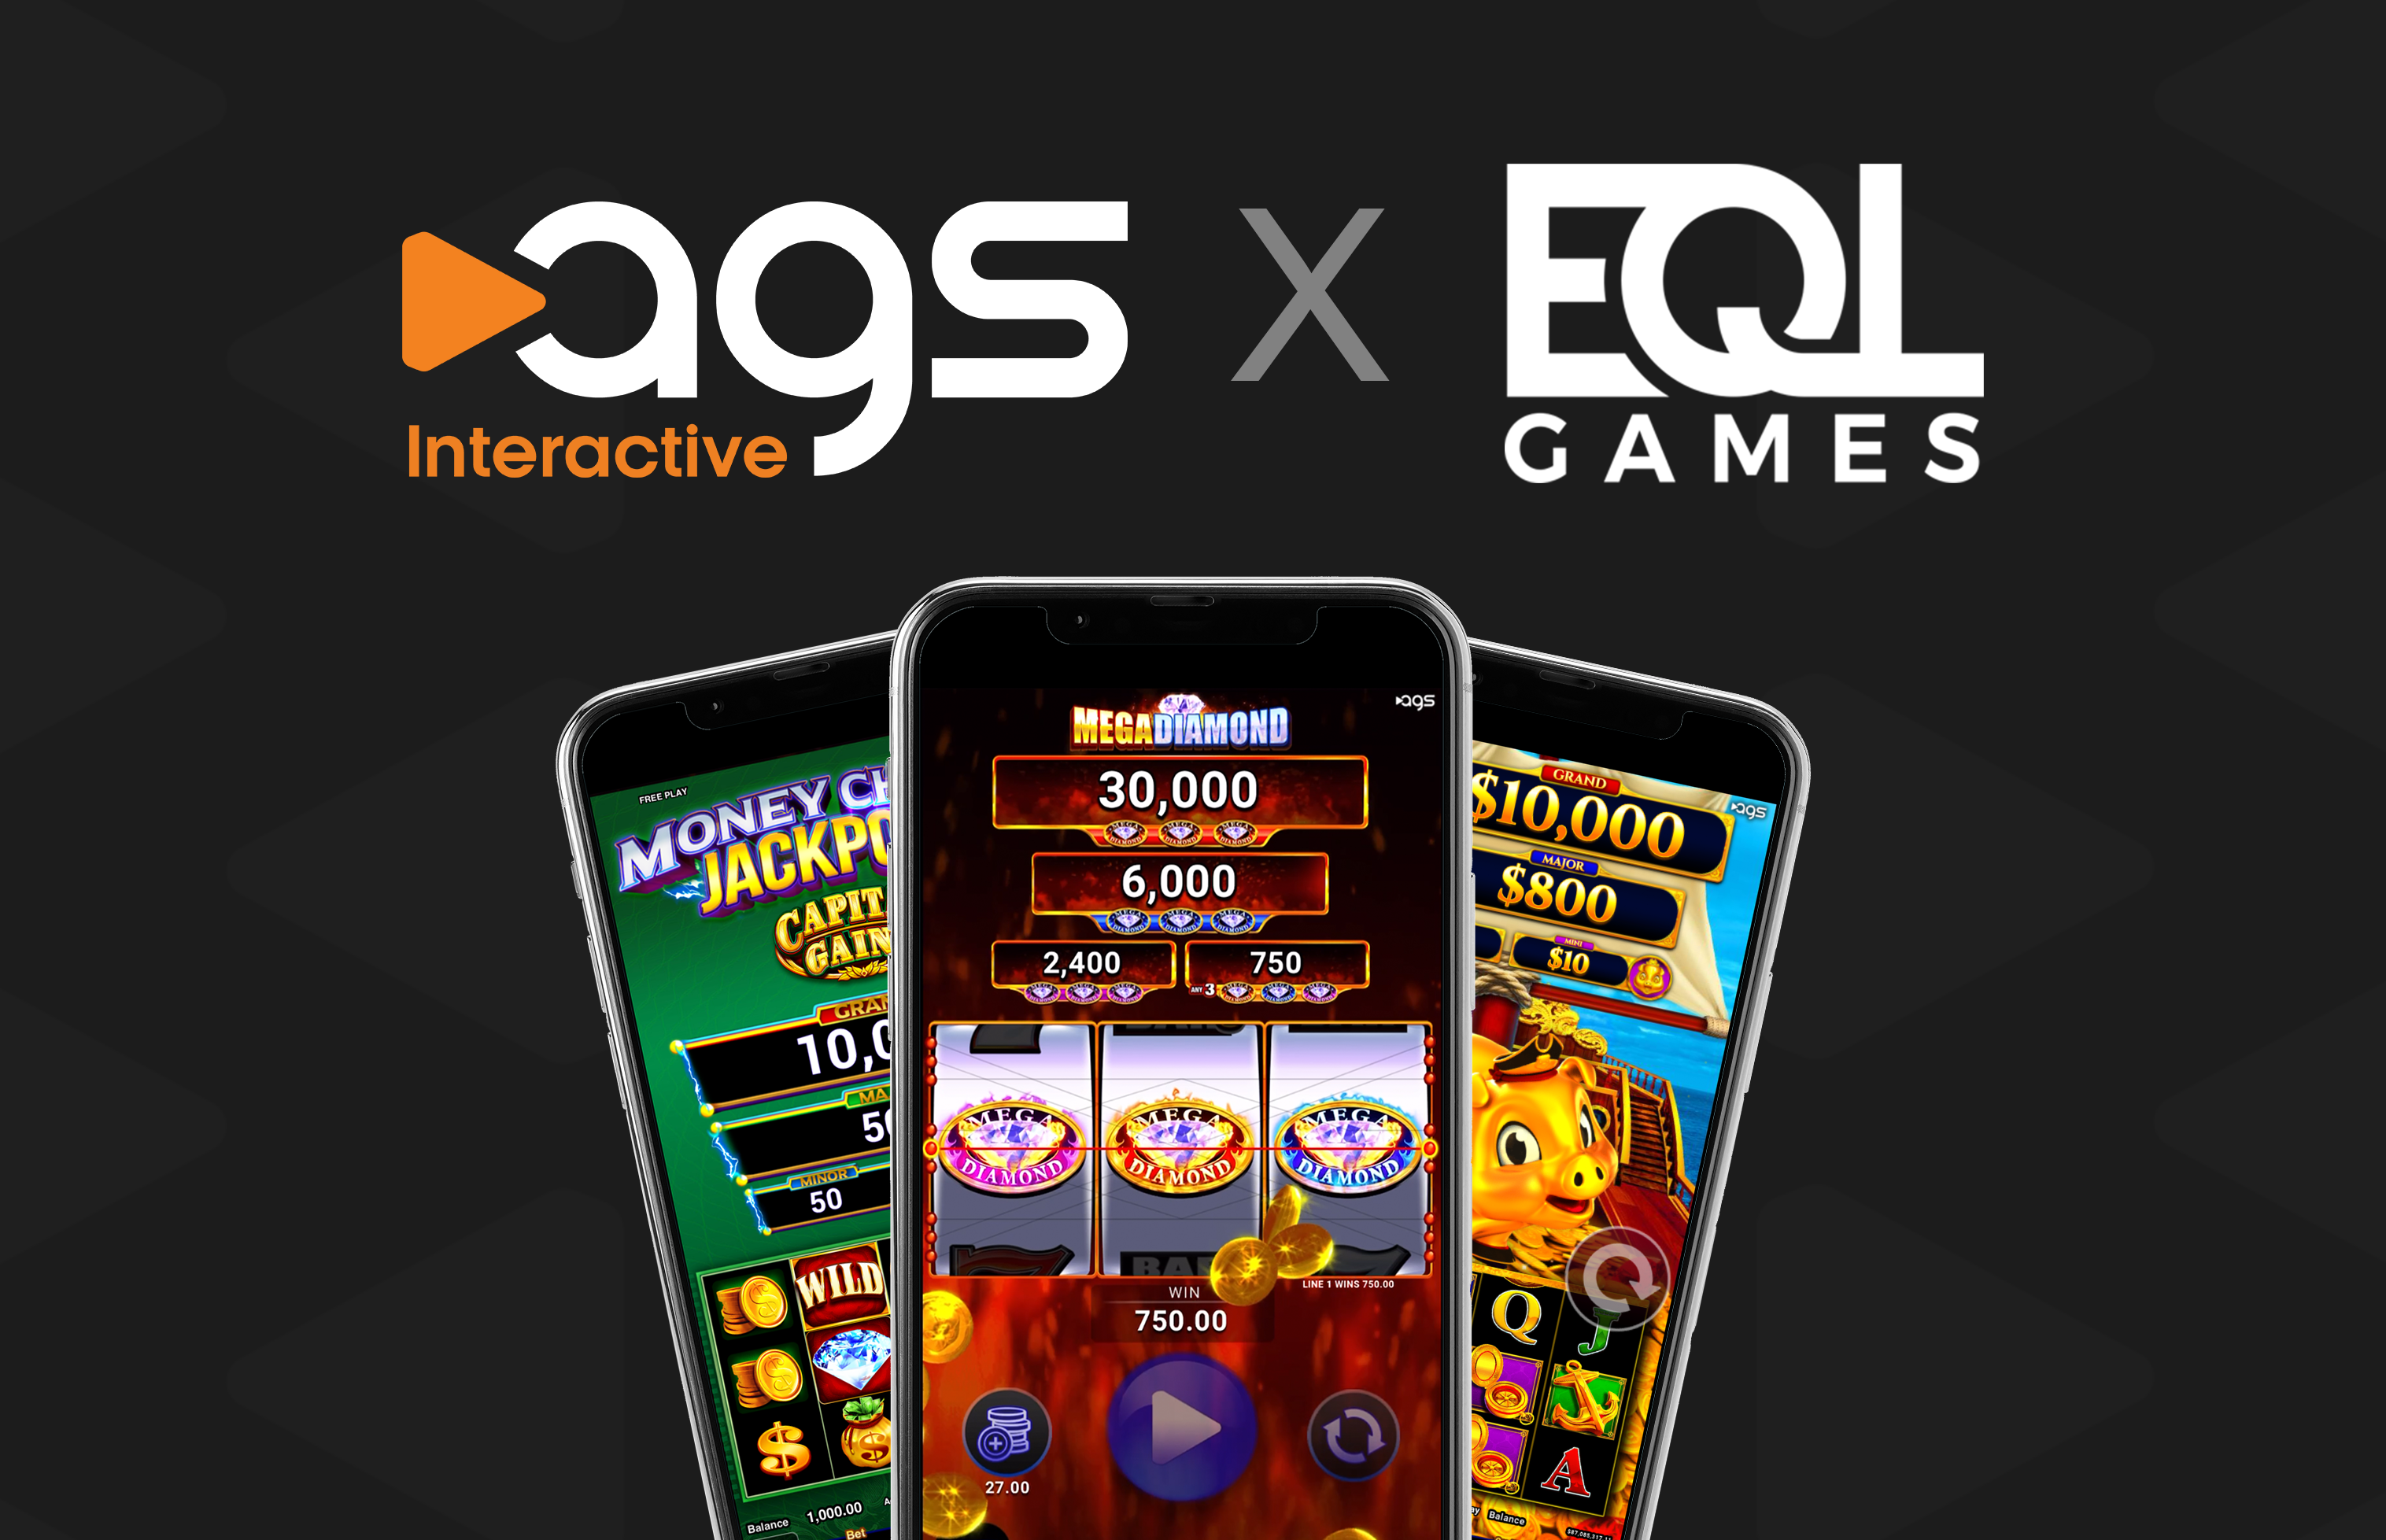 ags-seals-the-deal-with-ilottery-aggregator-eql-games-at-ice-london-2024